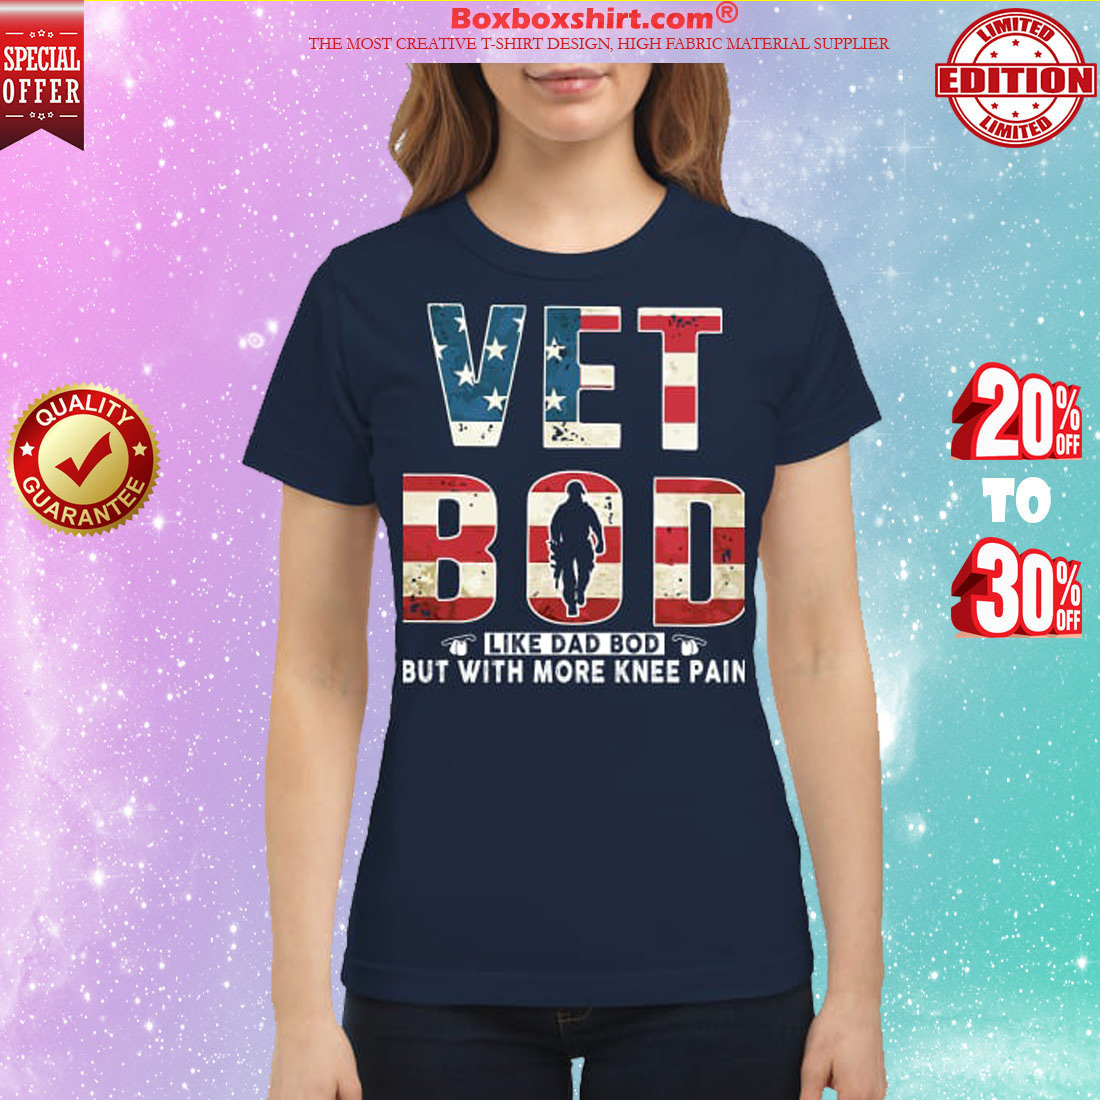 Vet Bod like dad dod but with more knee pain classic shirt